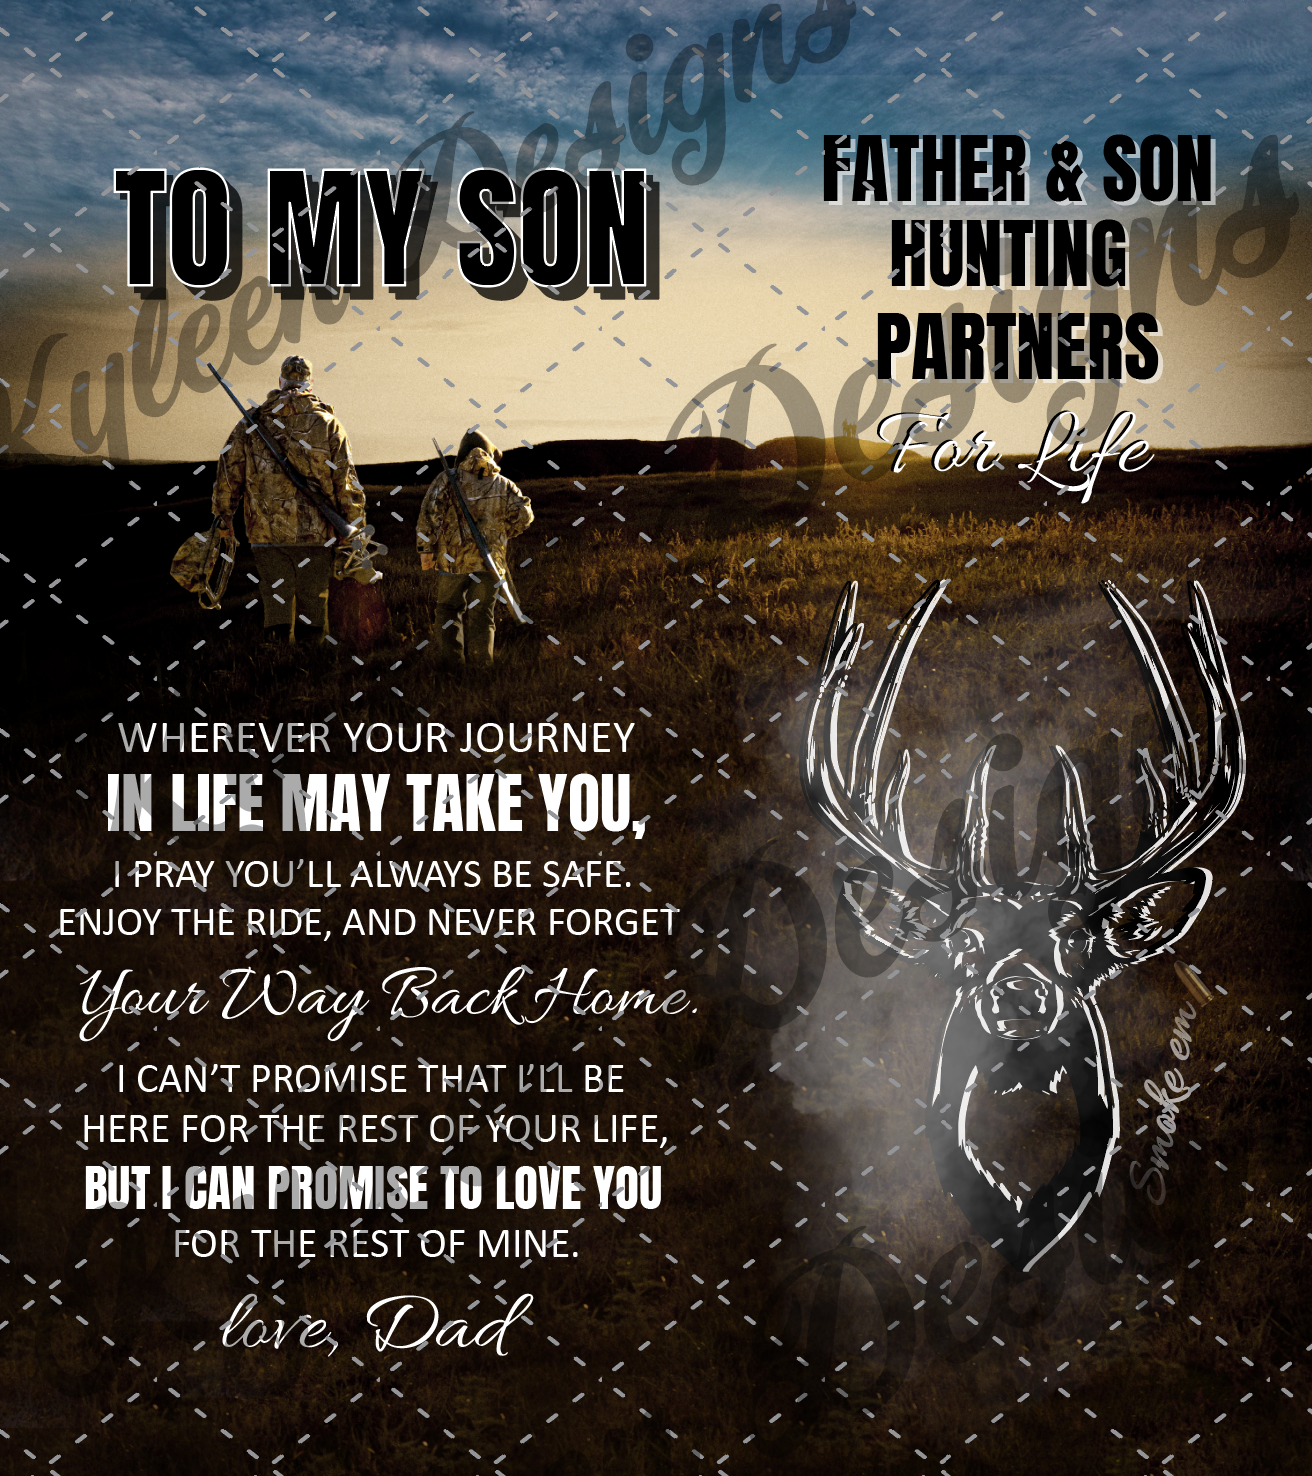 To my son hunting partners digital file